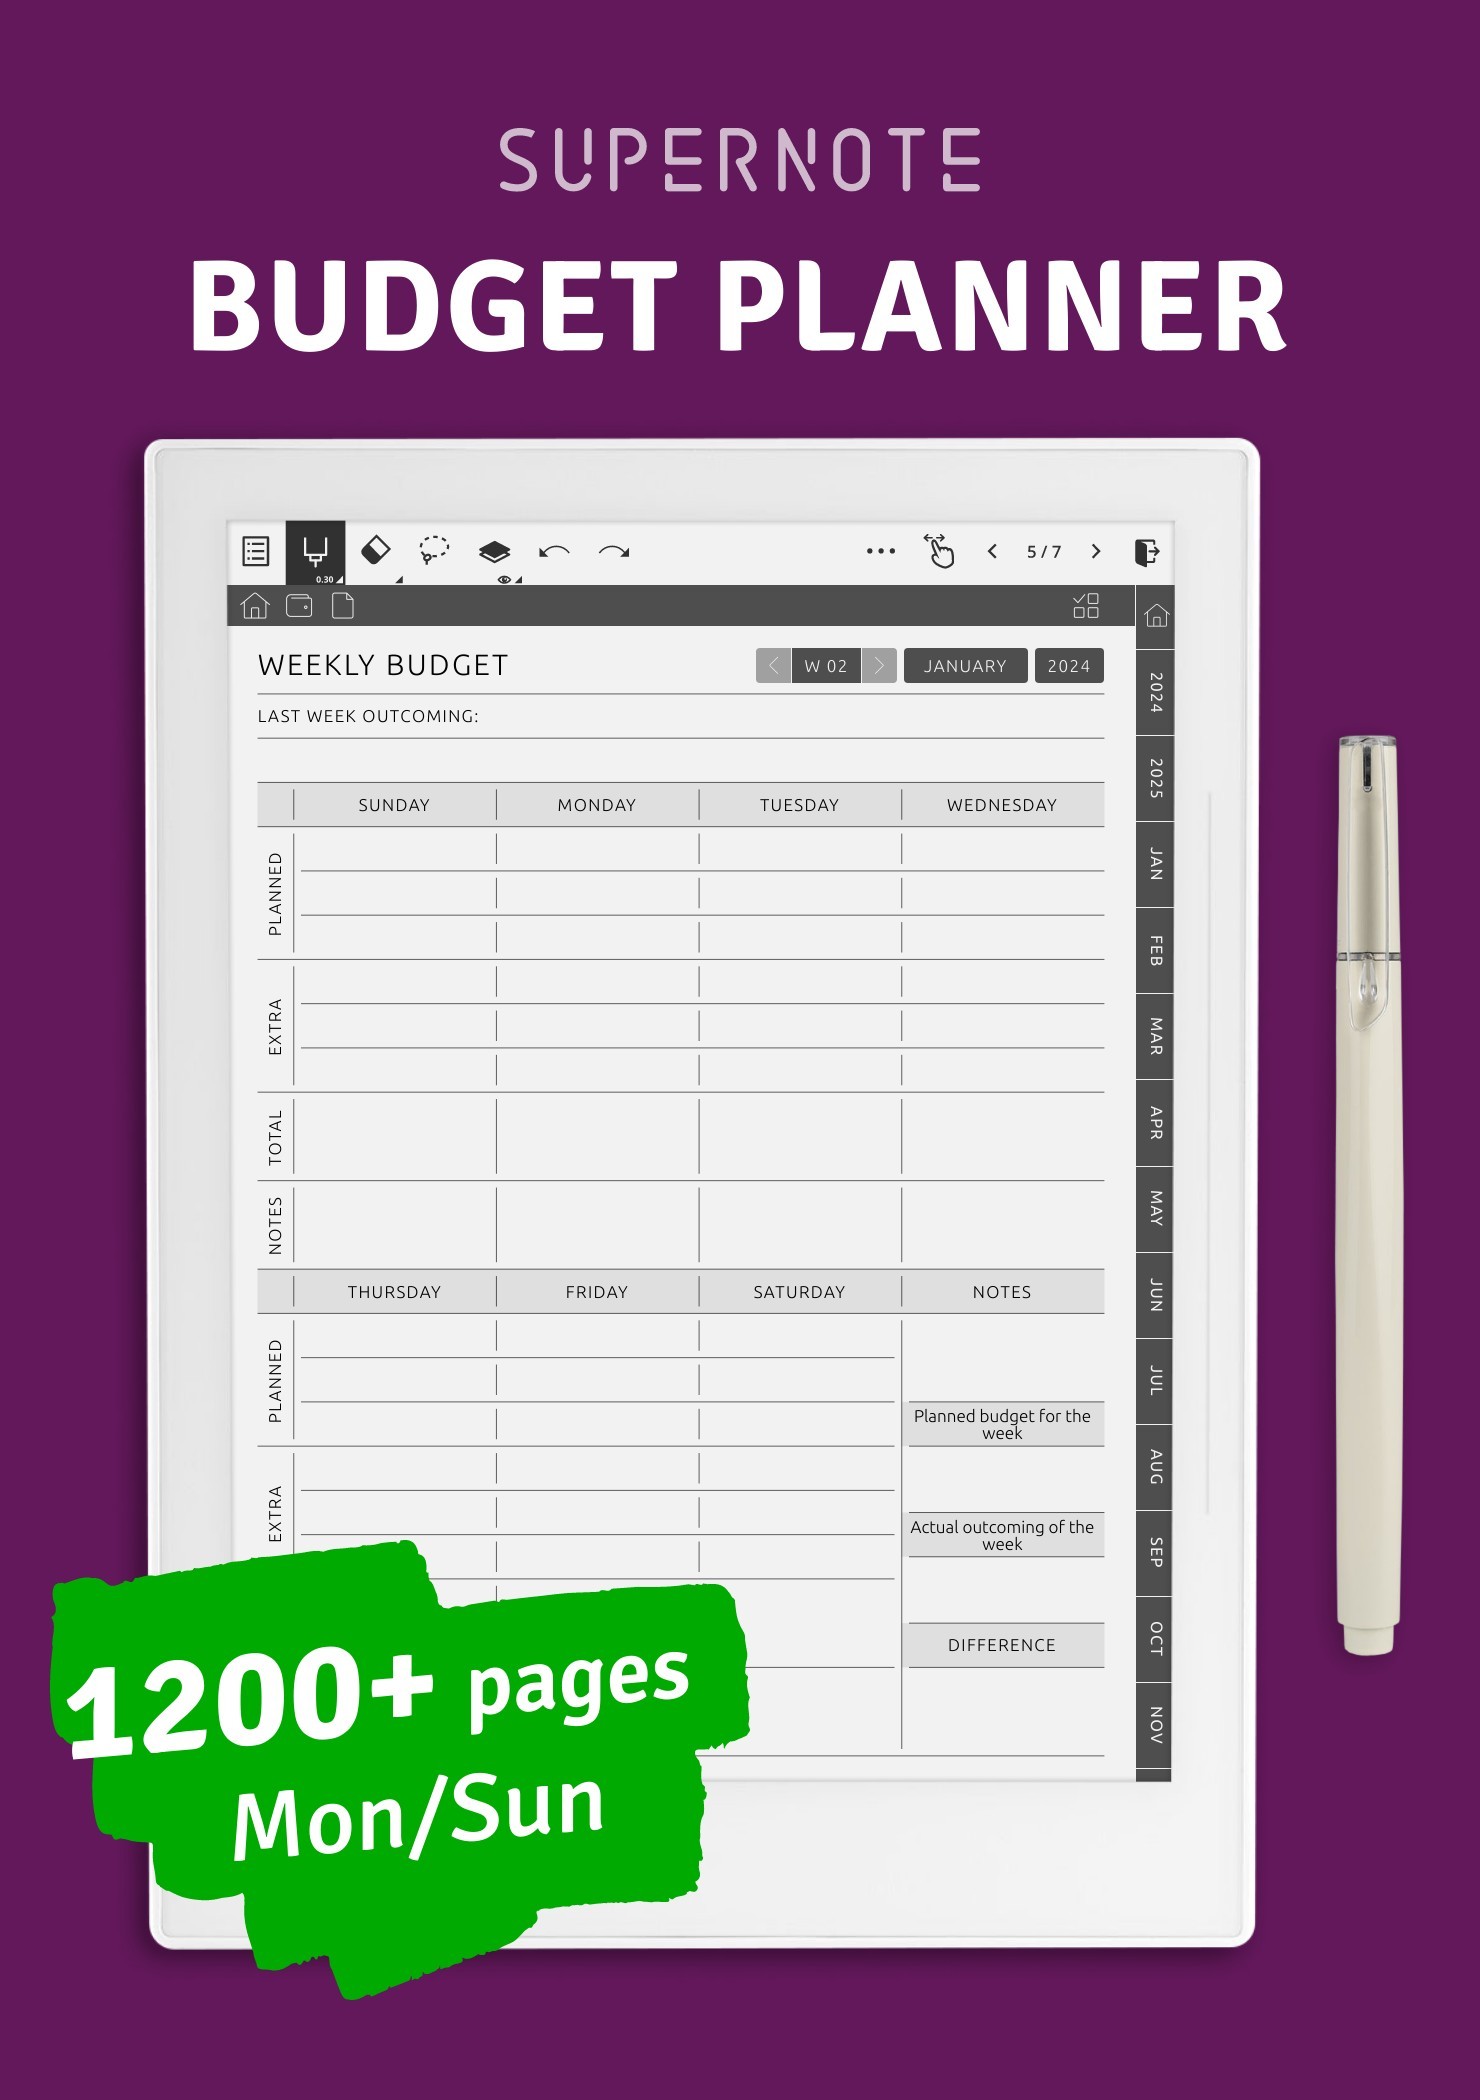 A6 PDF BI-WEEKLY Budget Overview Template Printable, Paycheck